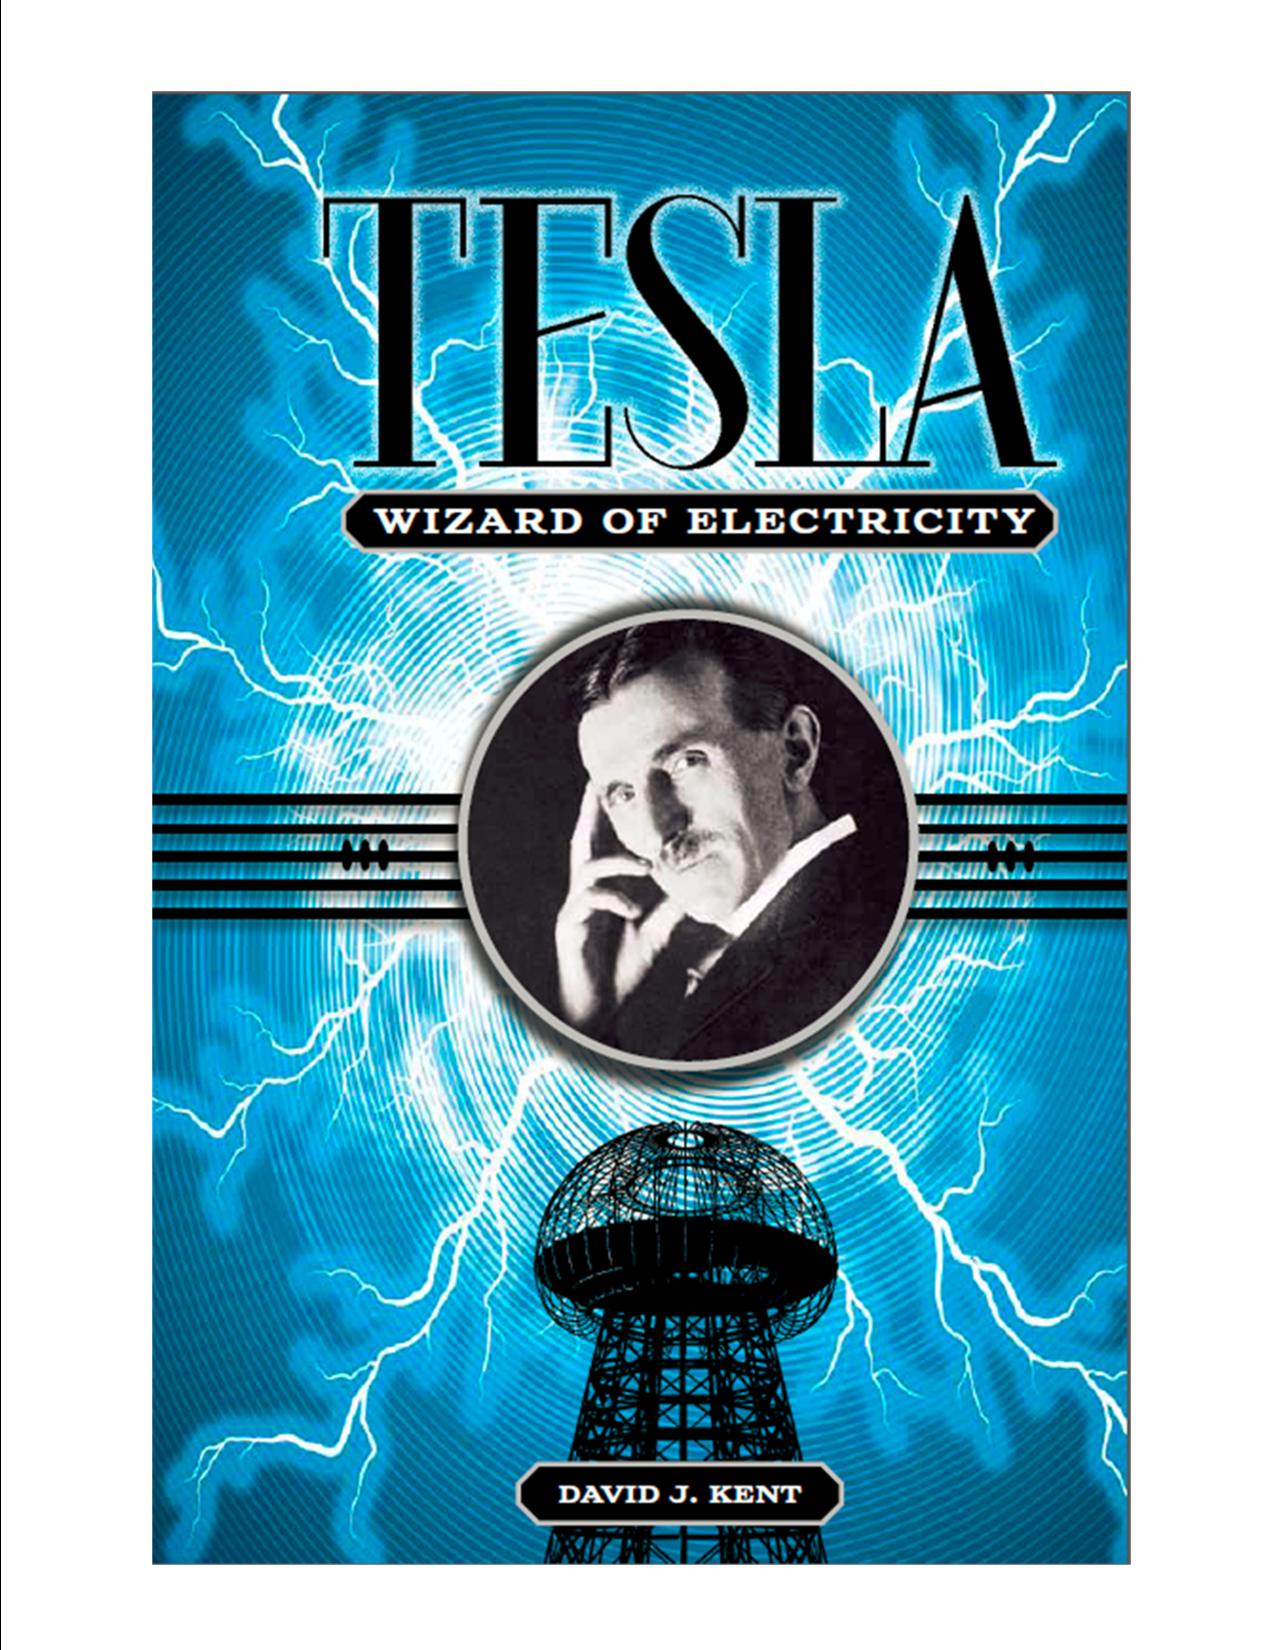 Tesla book cover from CB 3-7-13